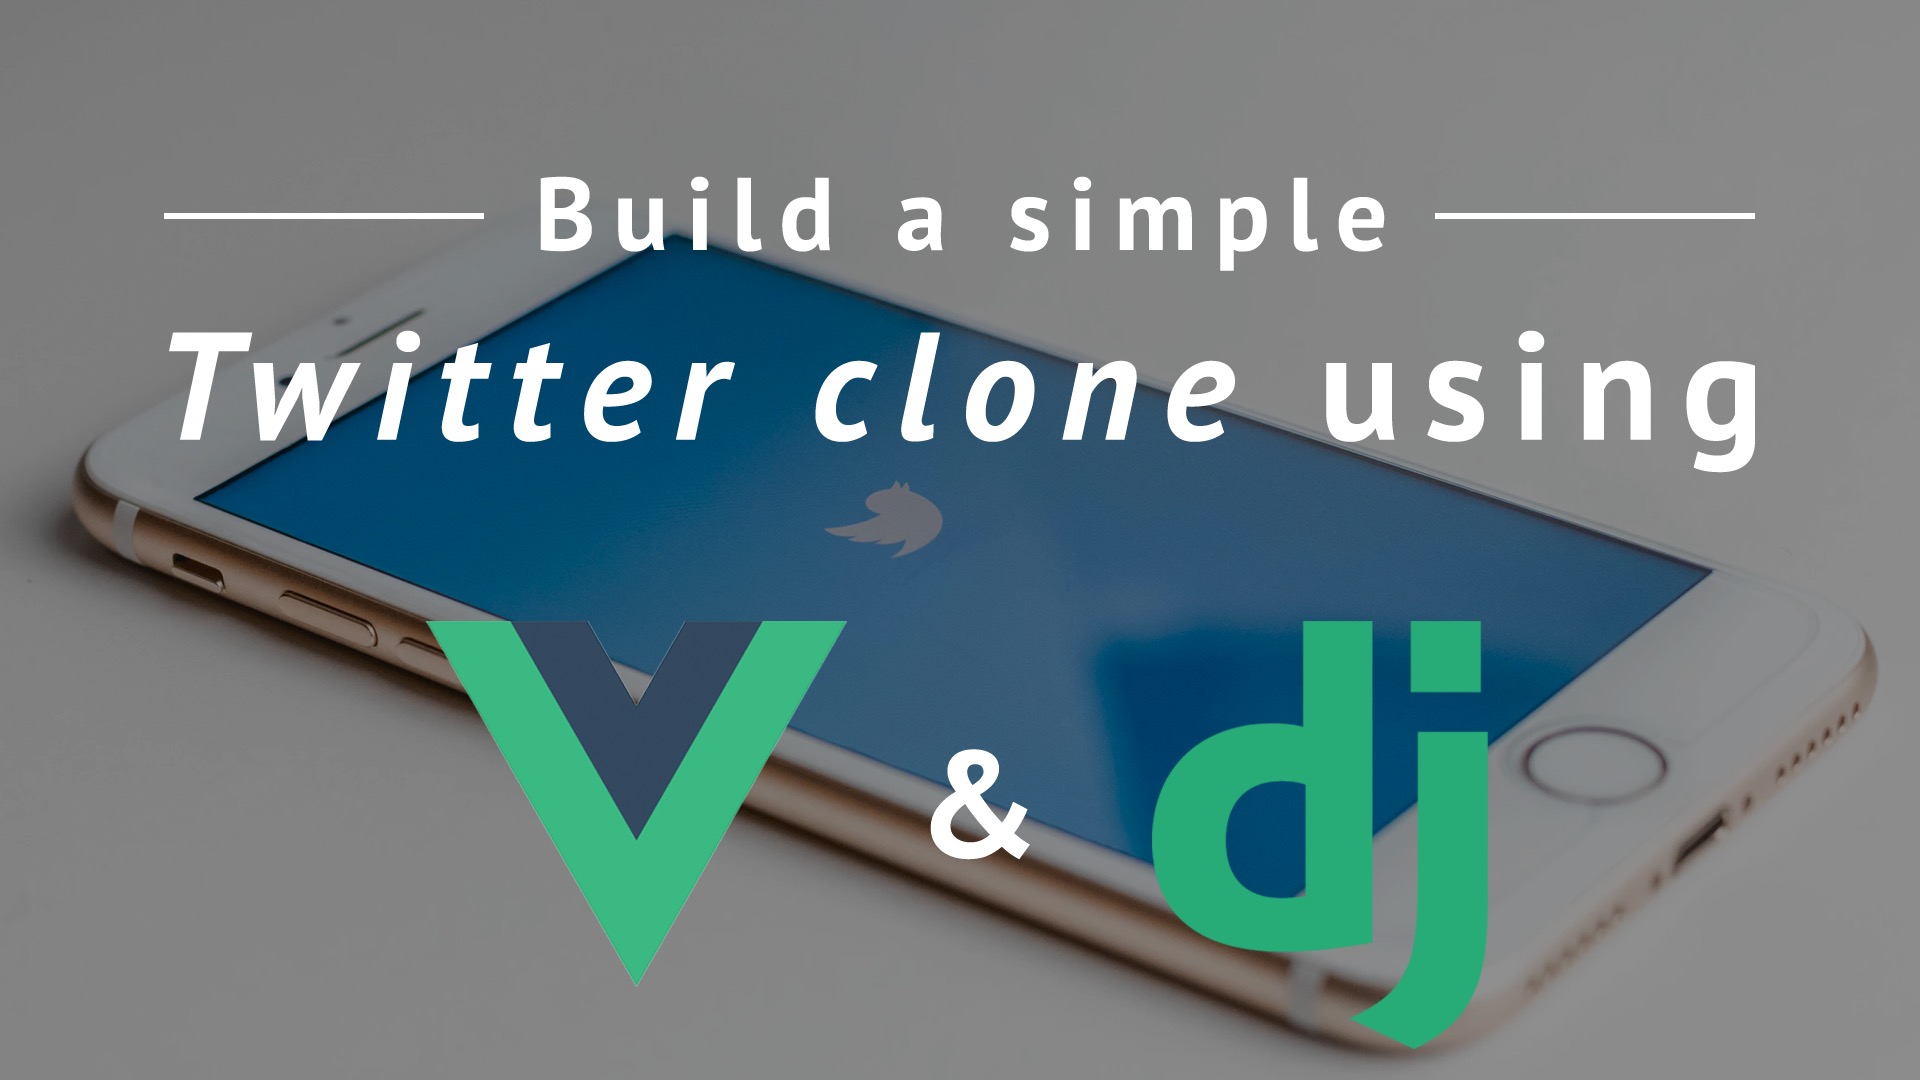 Build a simple Twitter clone using Django and Vue